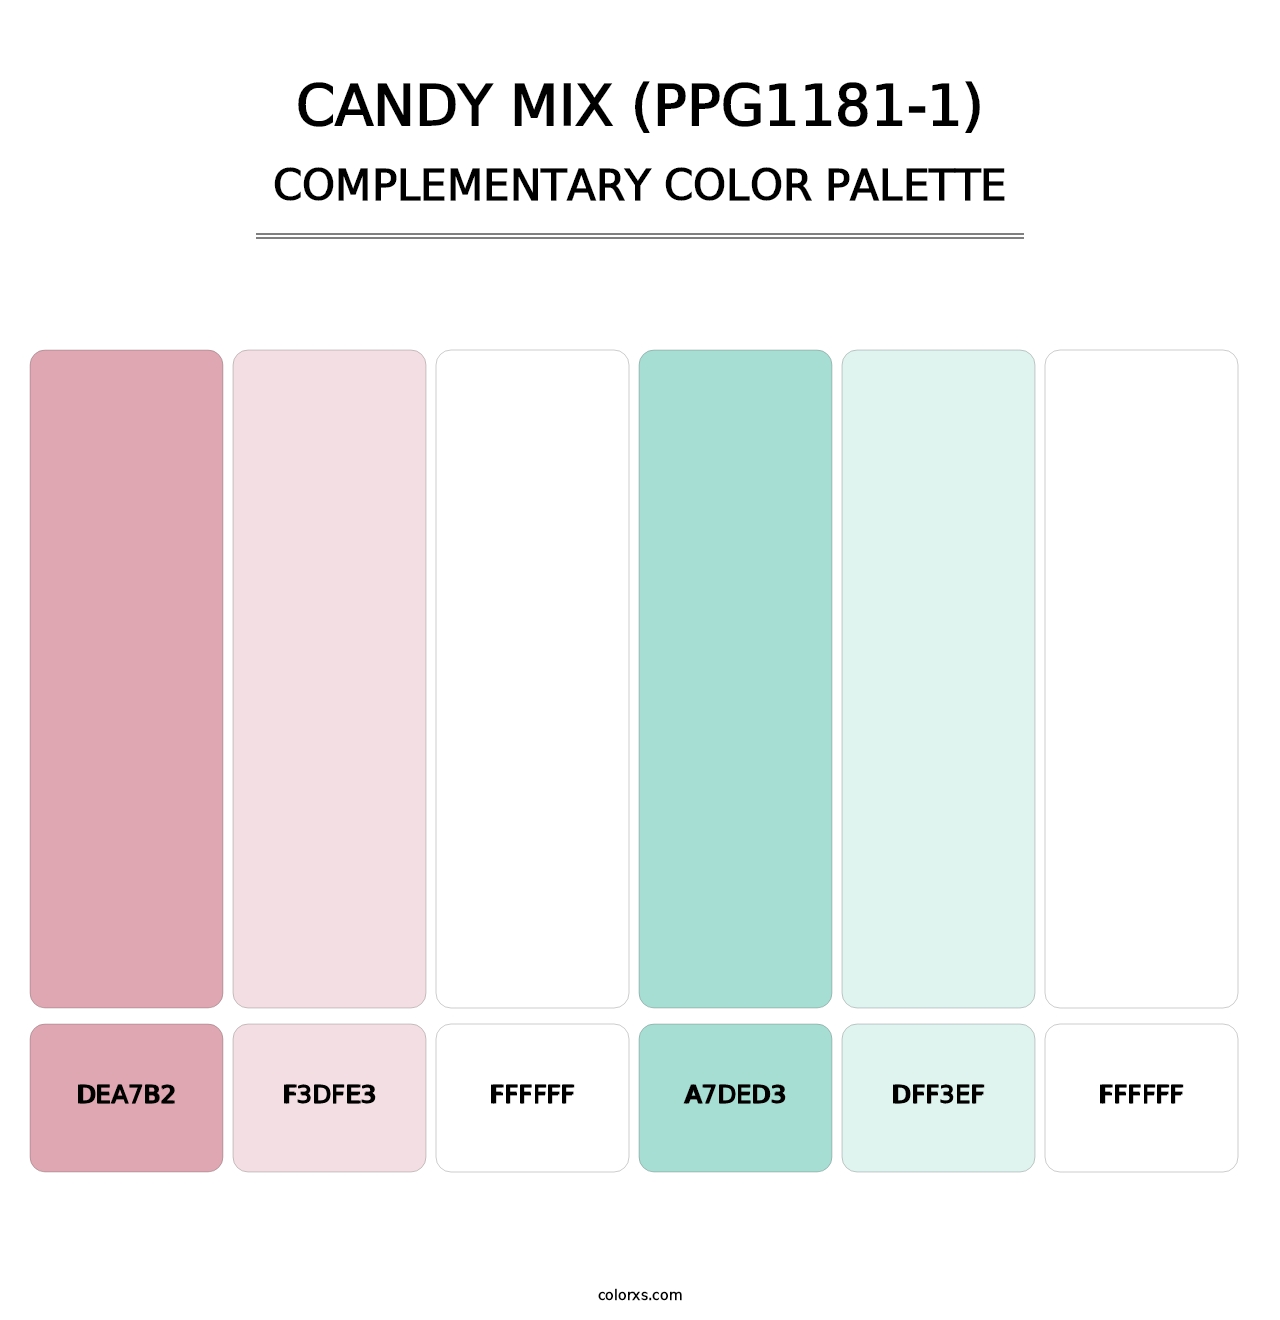 Candy Mix (PPG1181-1) - Complementary Color Palette